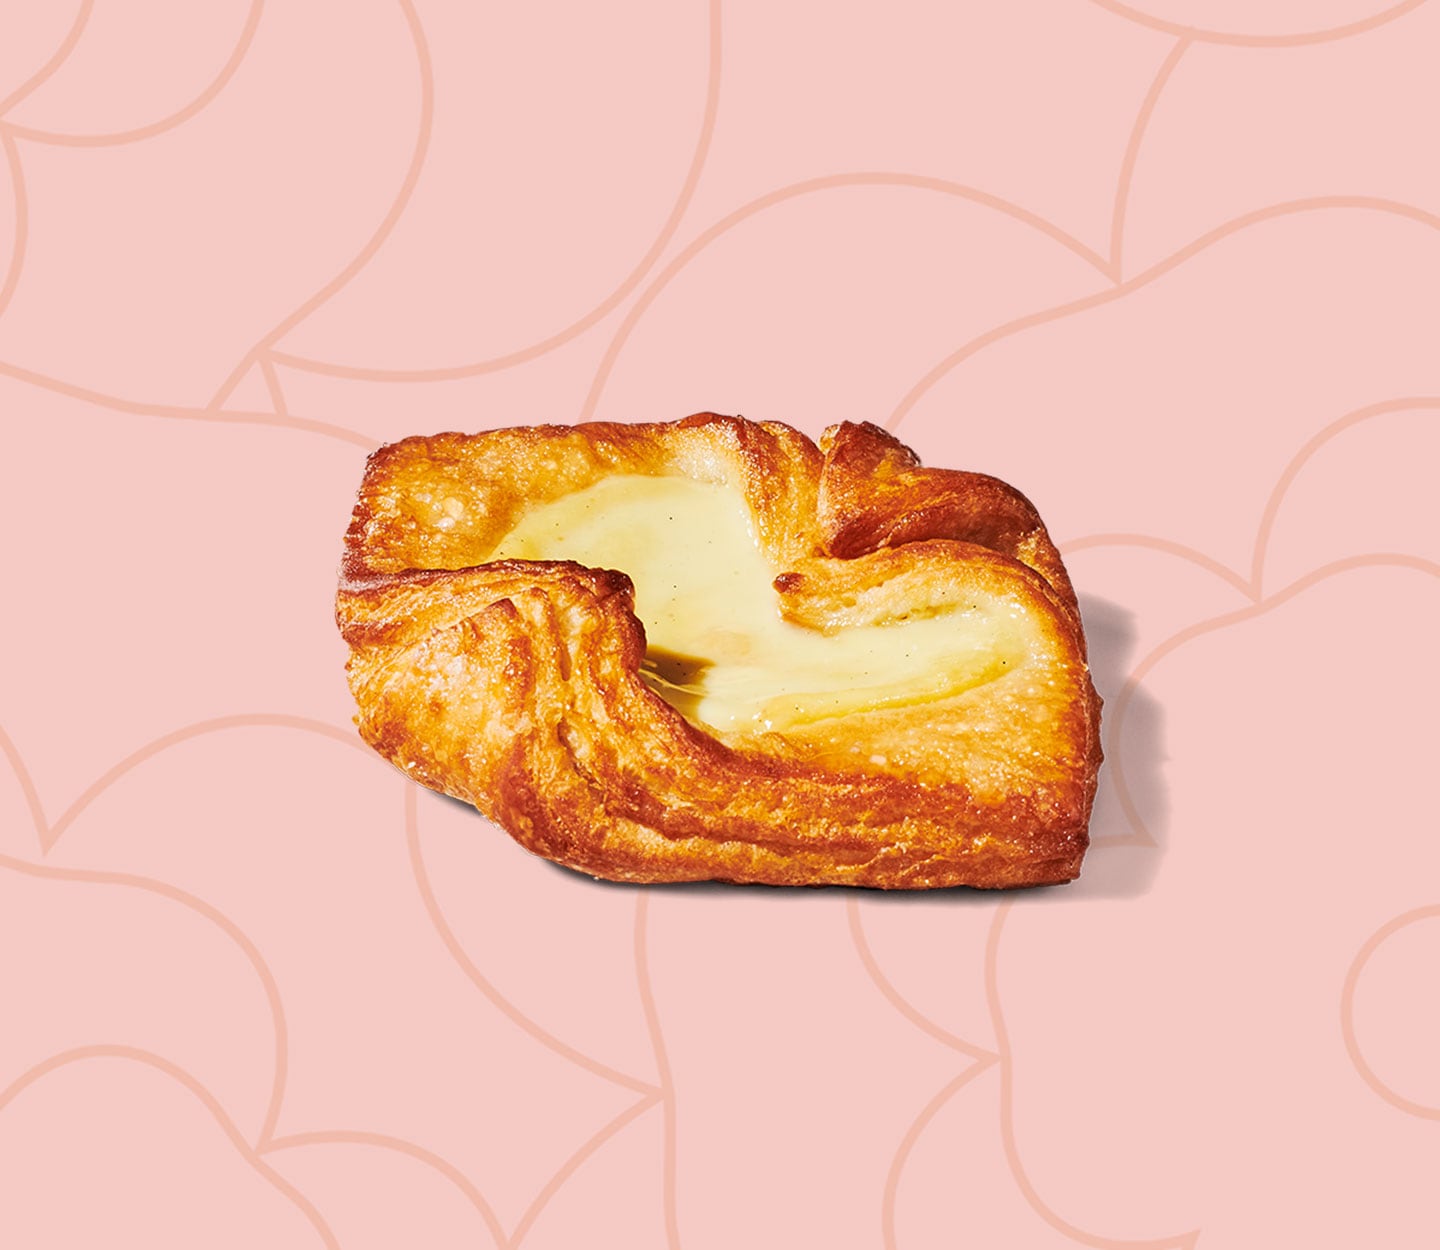 Golden pastry with a custard center.